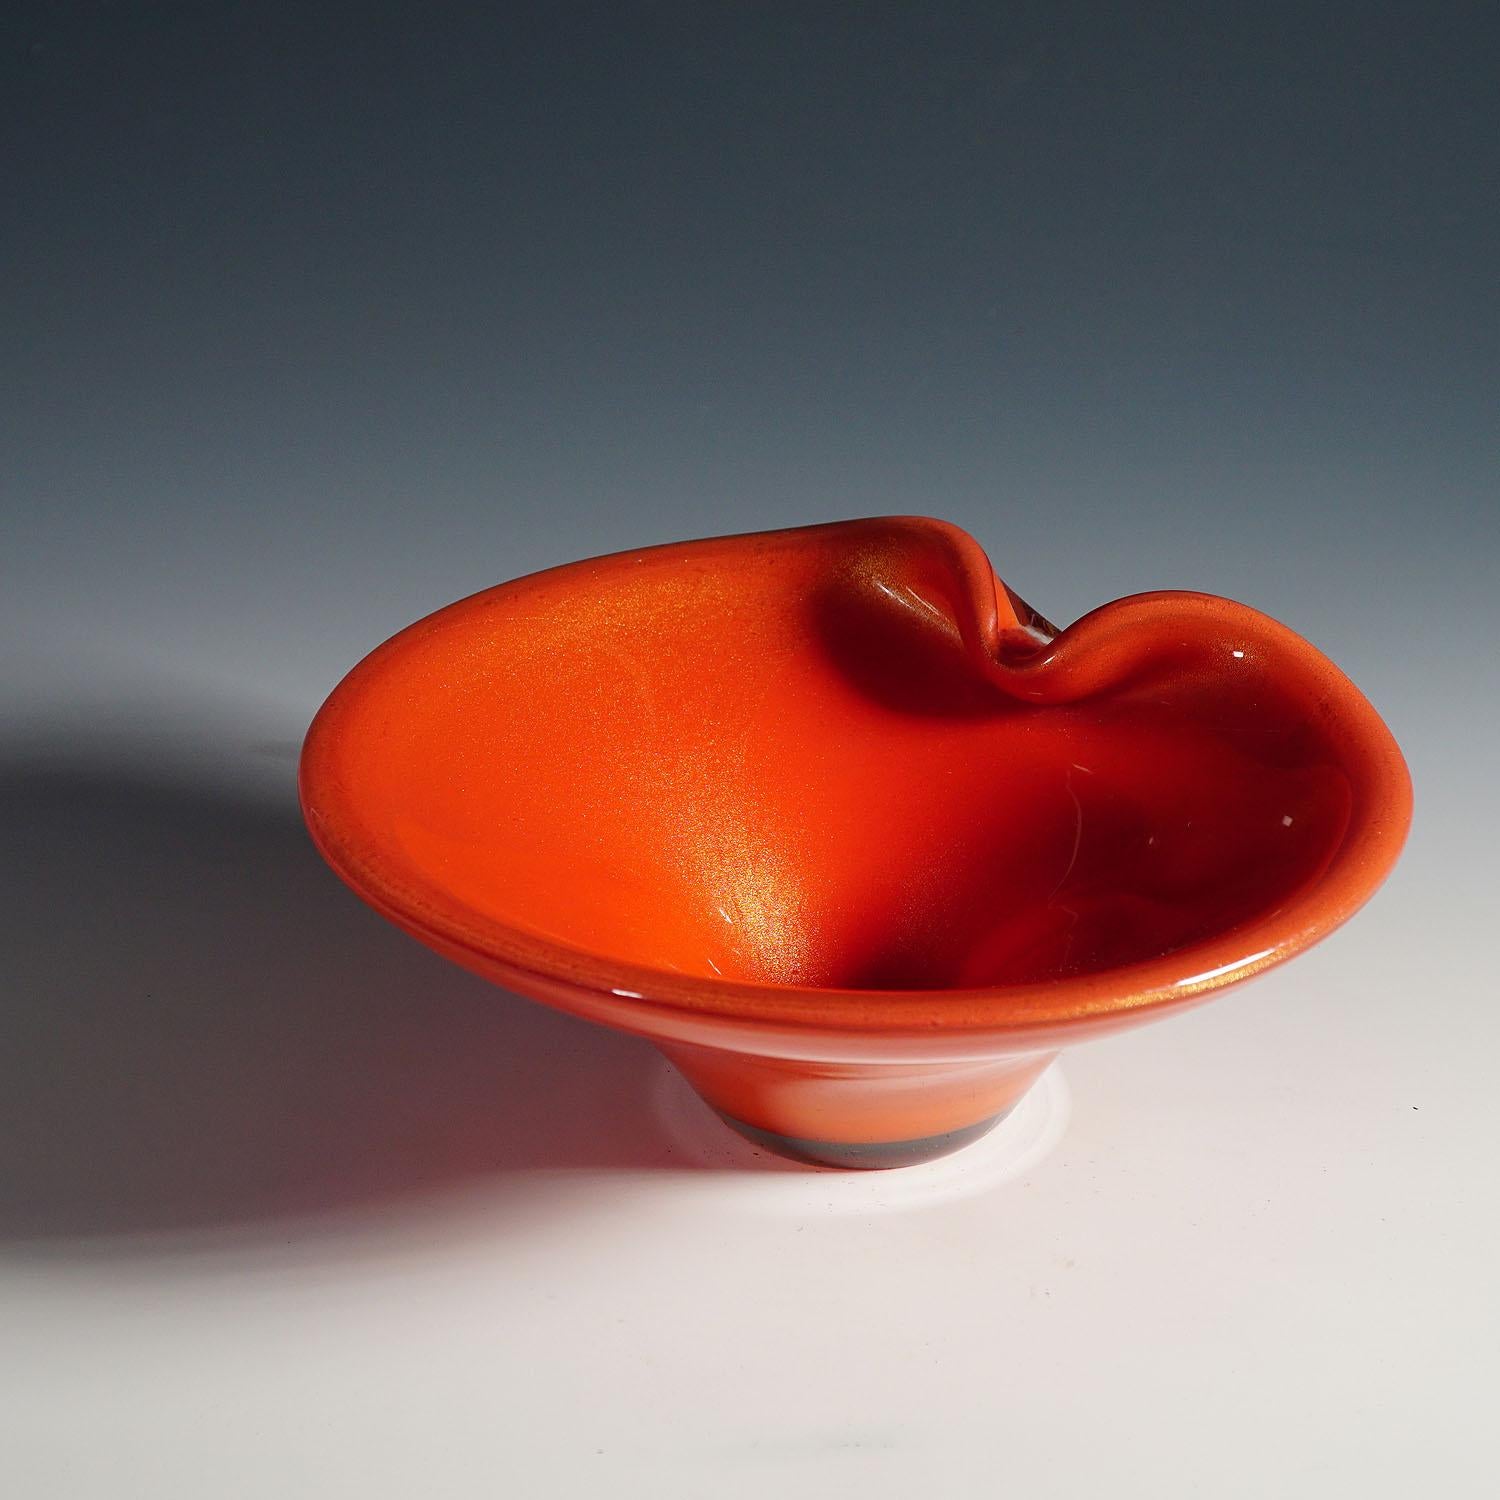 Archimede Seguso (attr.) 'Corallo Oro' Bowl, Murano Italy ca. 1950s

A Venetian art glass bowl most problably designed by Archimede Seguso for Vetreria Artistica Archimede Seguso ca. 1950s. Thick coral red glass with gold-foil decoration and a clear